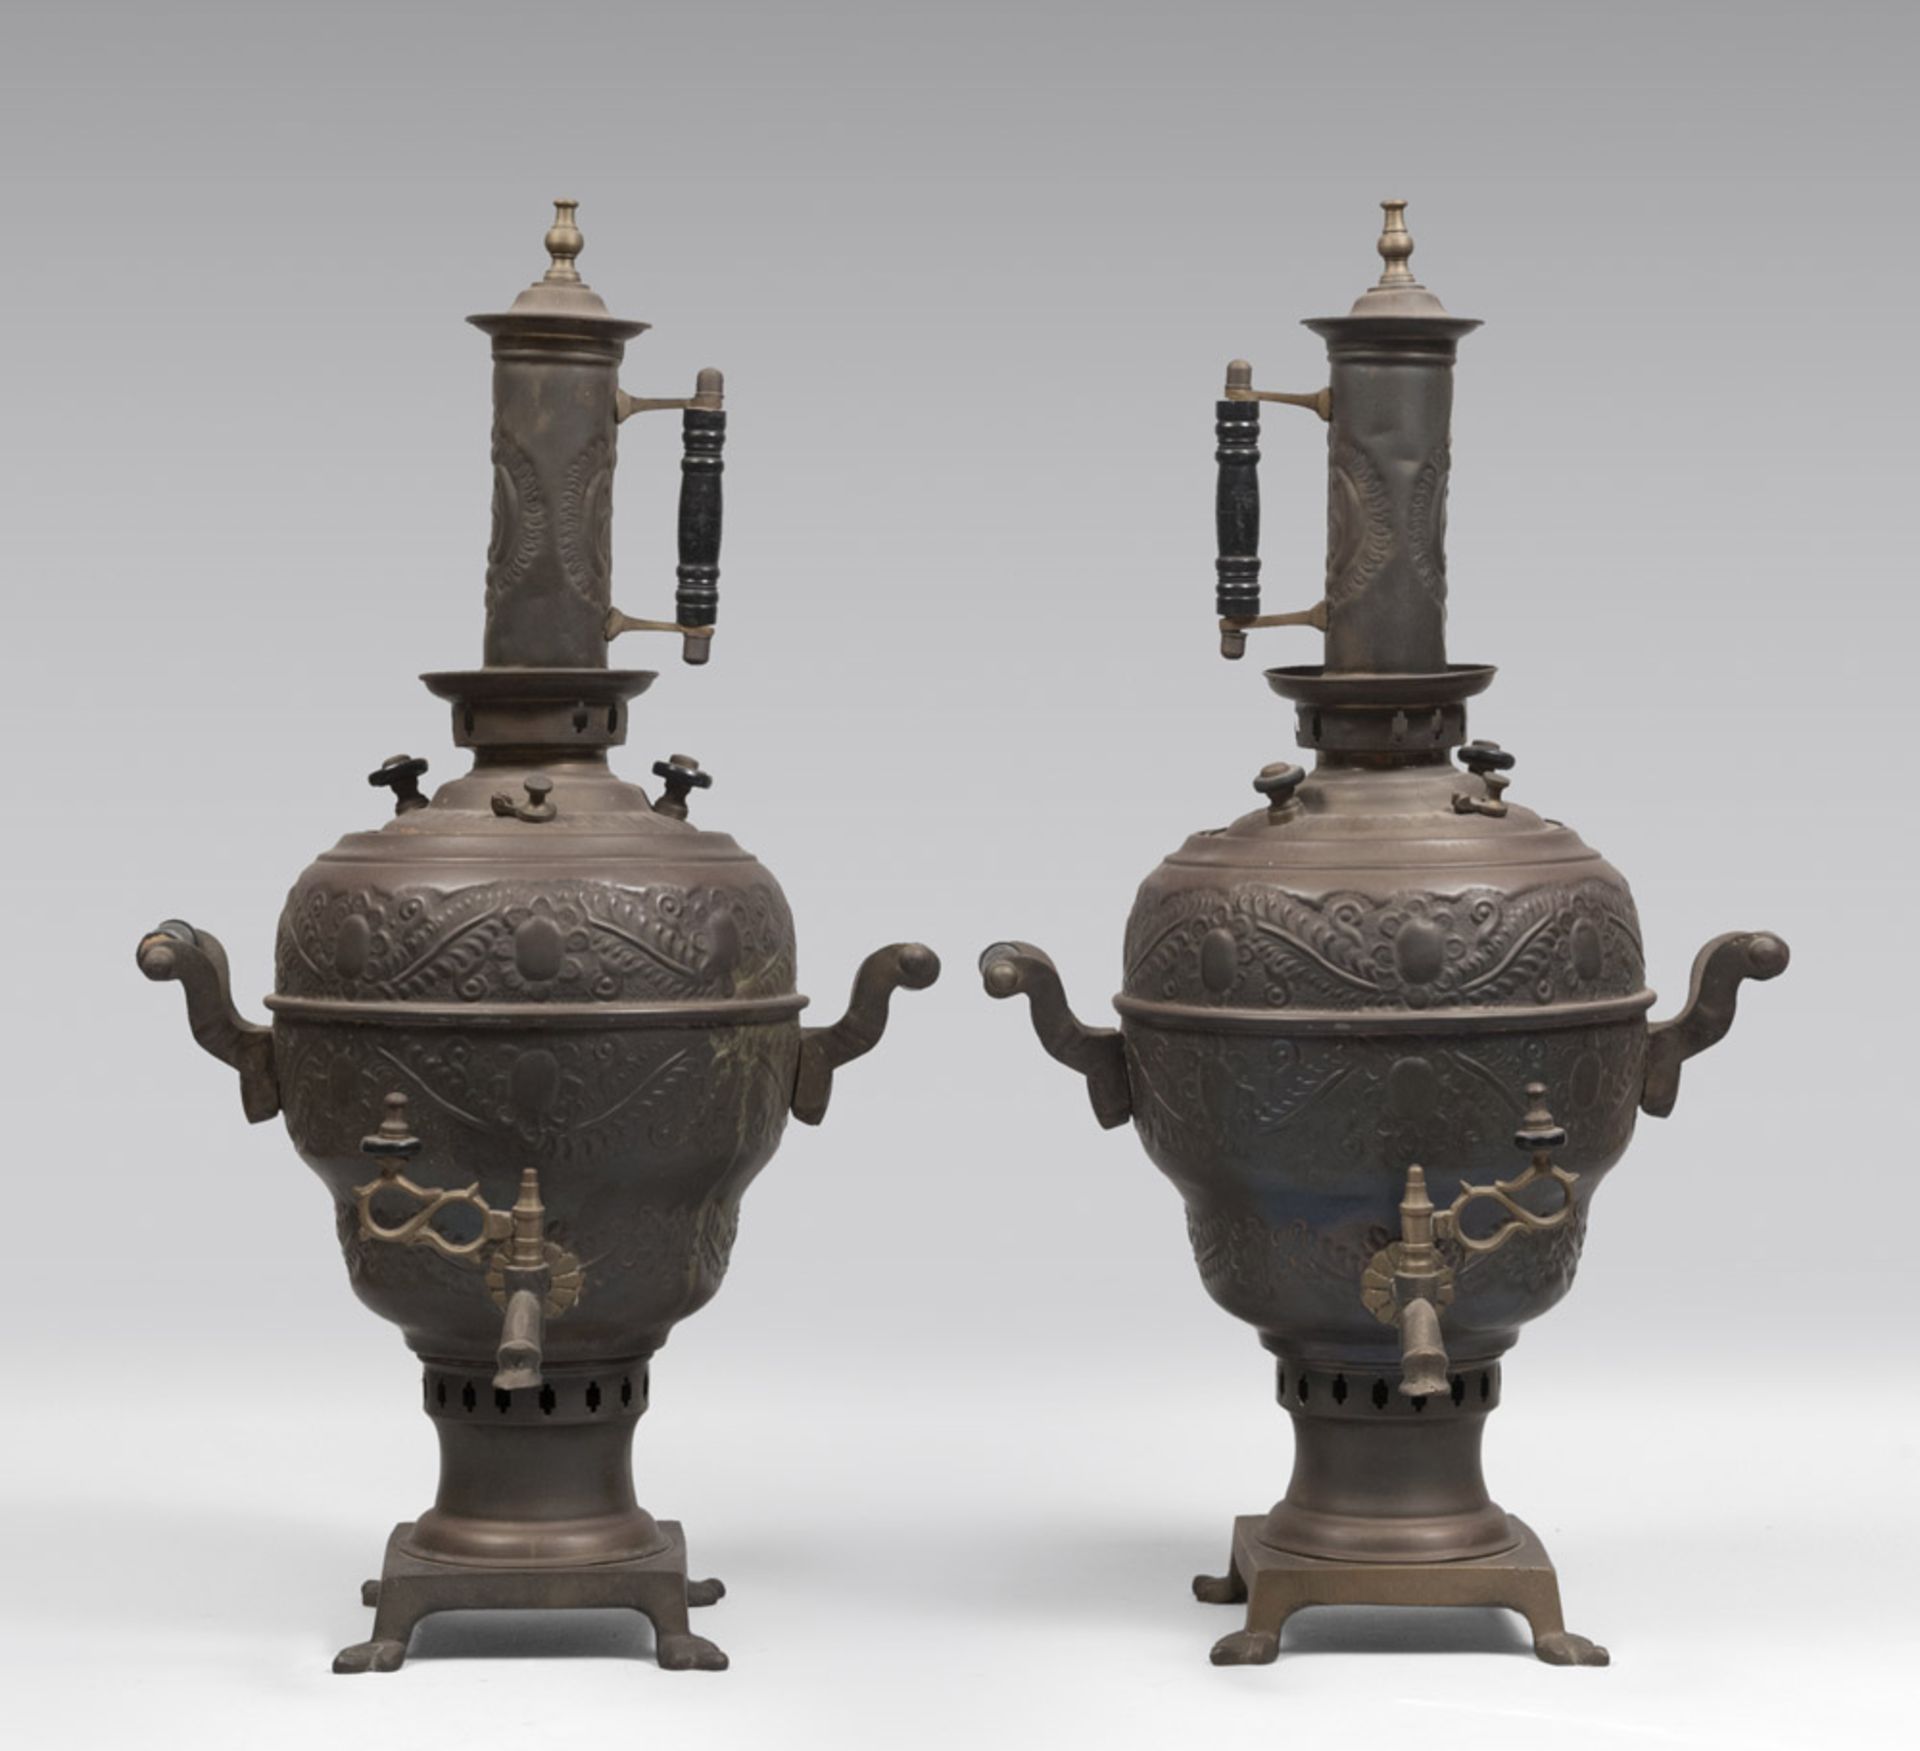 A pair of copper and brass samovar, late 19th century. Measures cm. 70 x 40 x 35. COPPIA DI